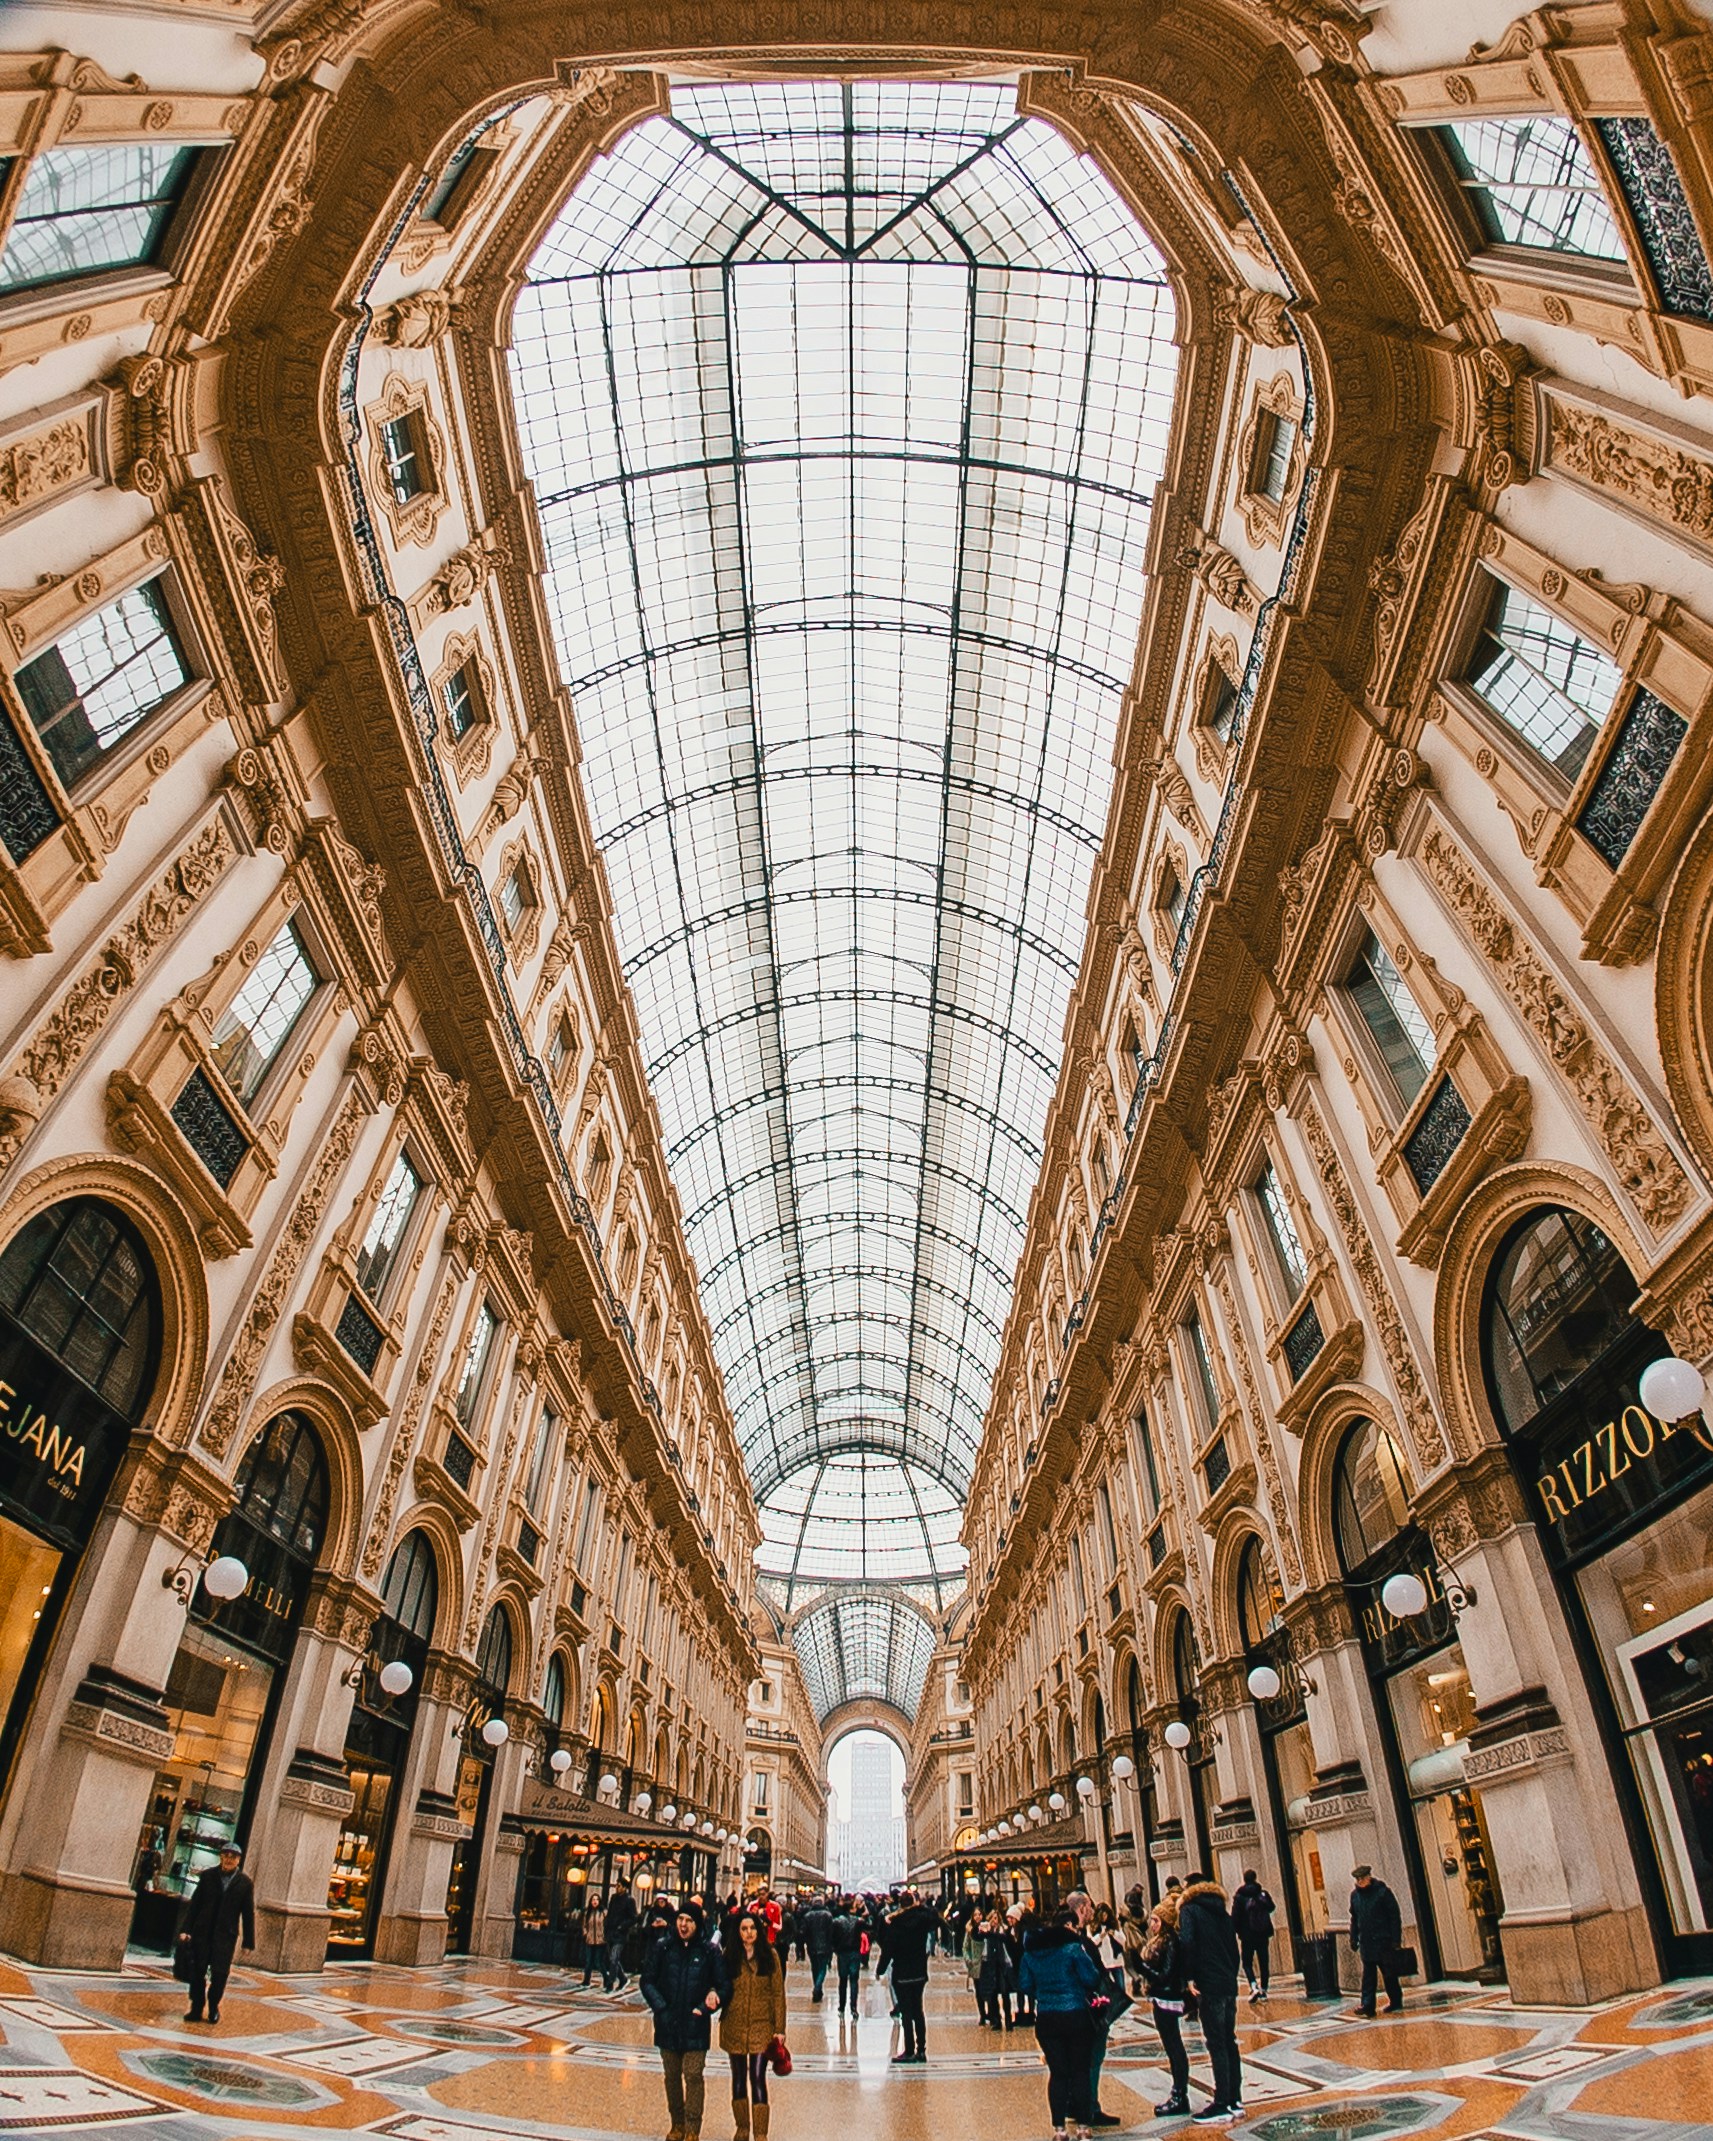 I had a about 30 minutes to explore Milan and had seen pictures of this place in the past. I knew that the entire place was massive, so I packed up the 8mm and decided to try shooting ultra wide to capture all of it’s beauty.